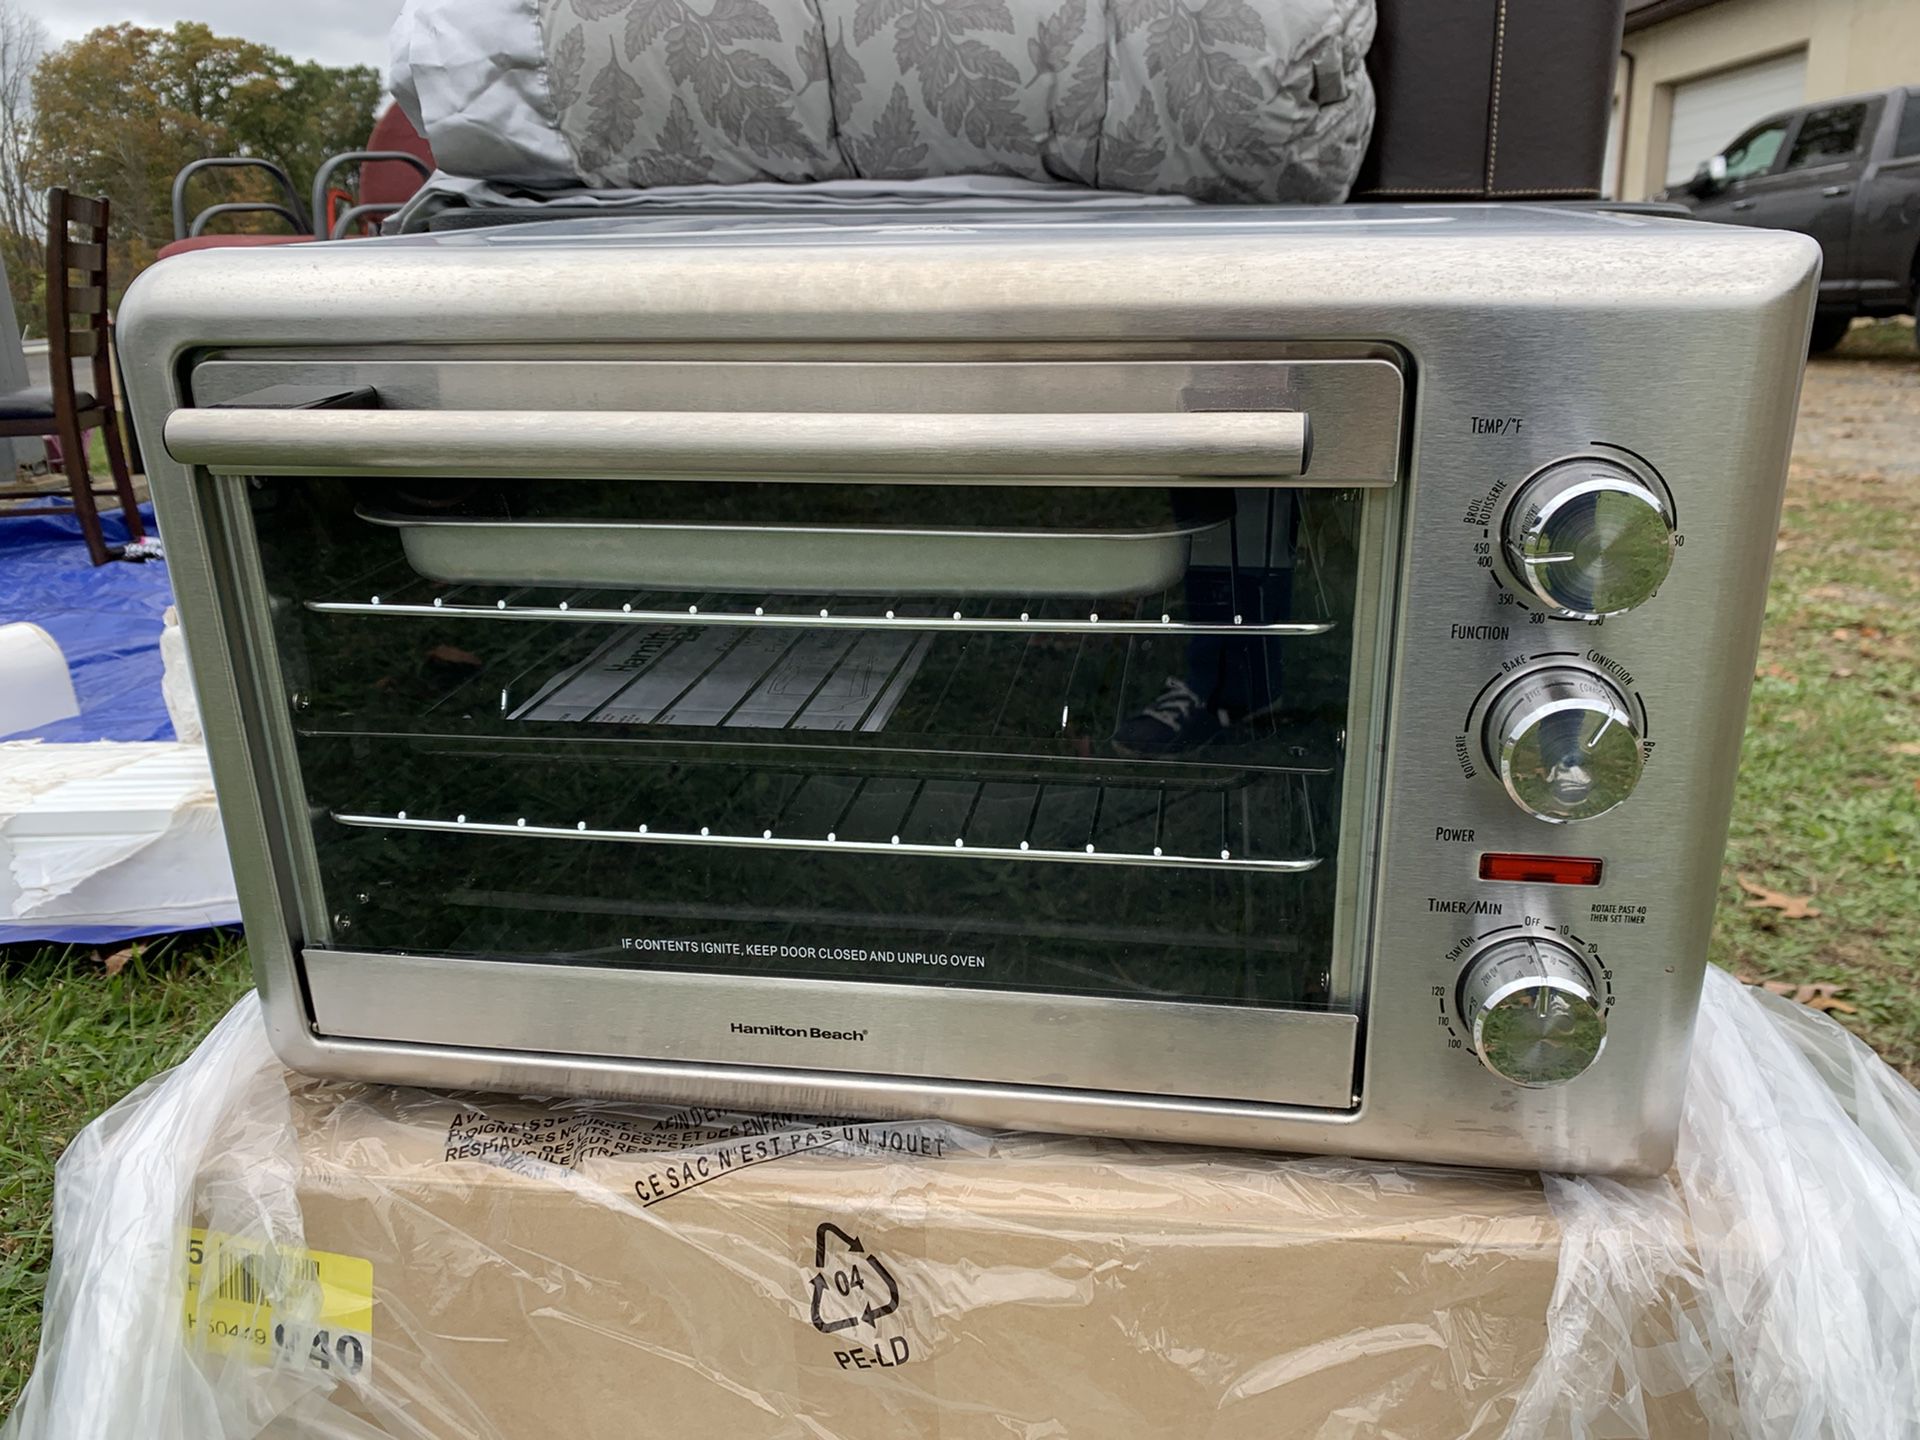 Hamilton Beach confection/toaster oven with rotisserie